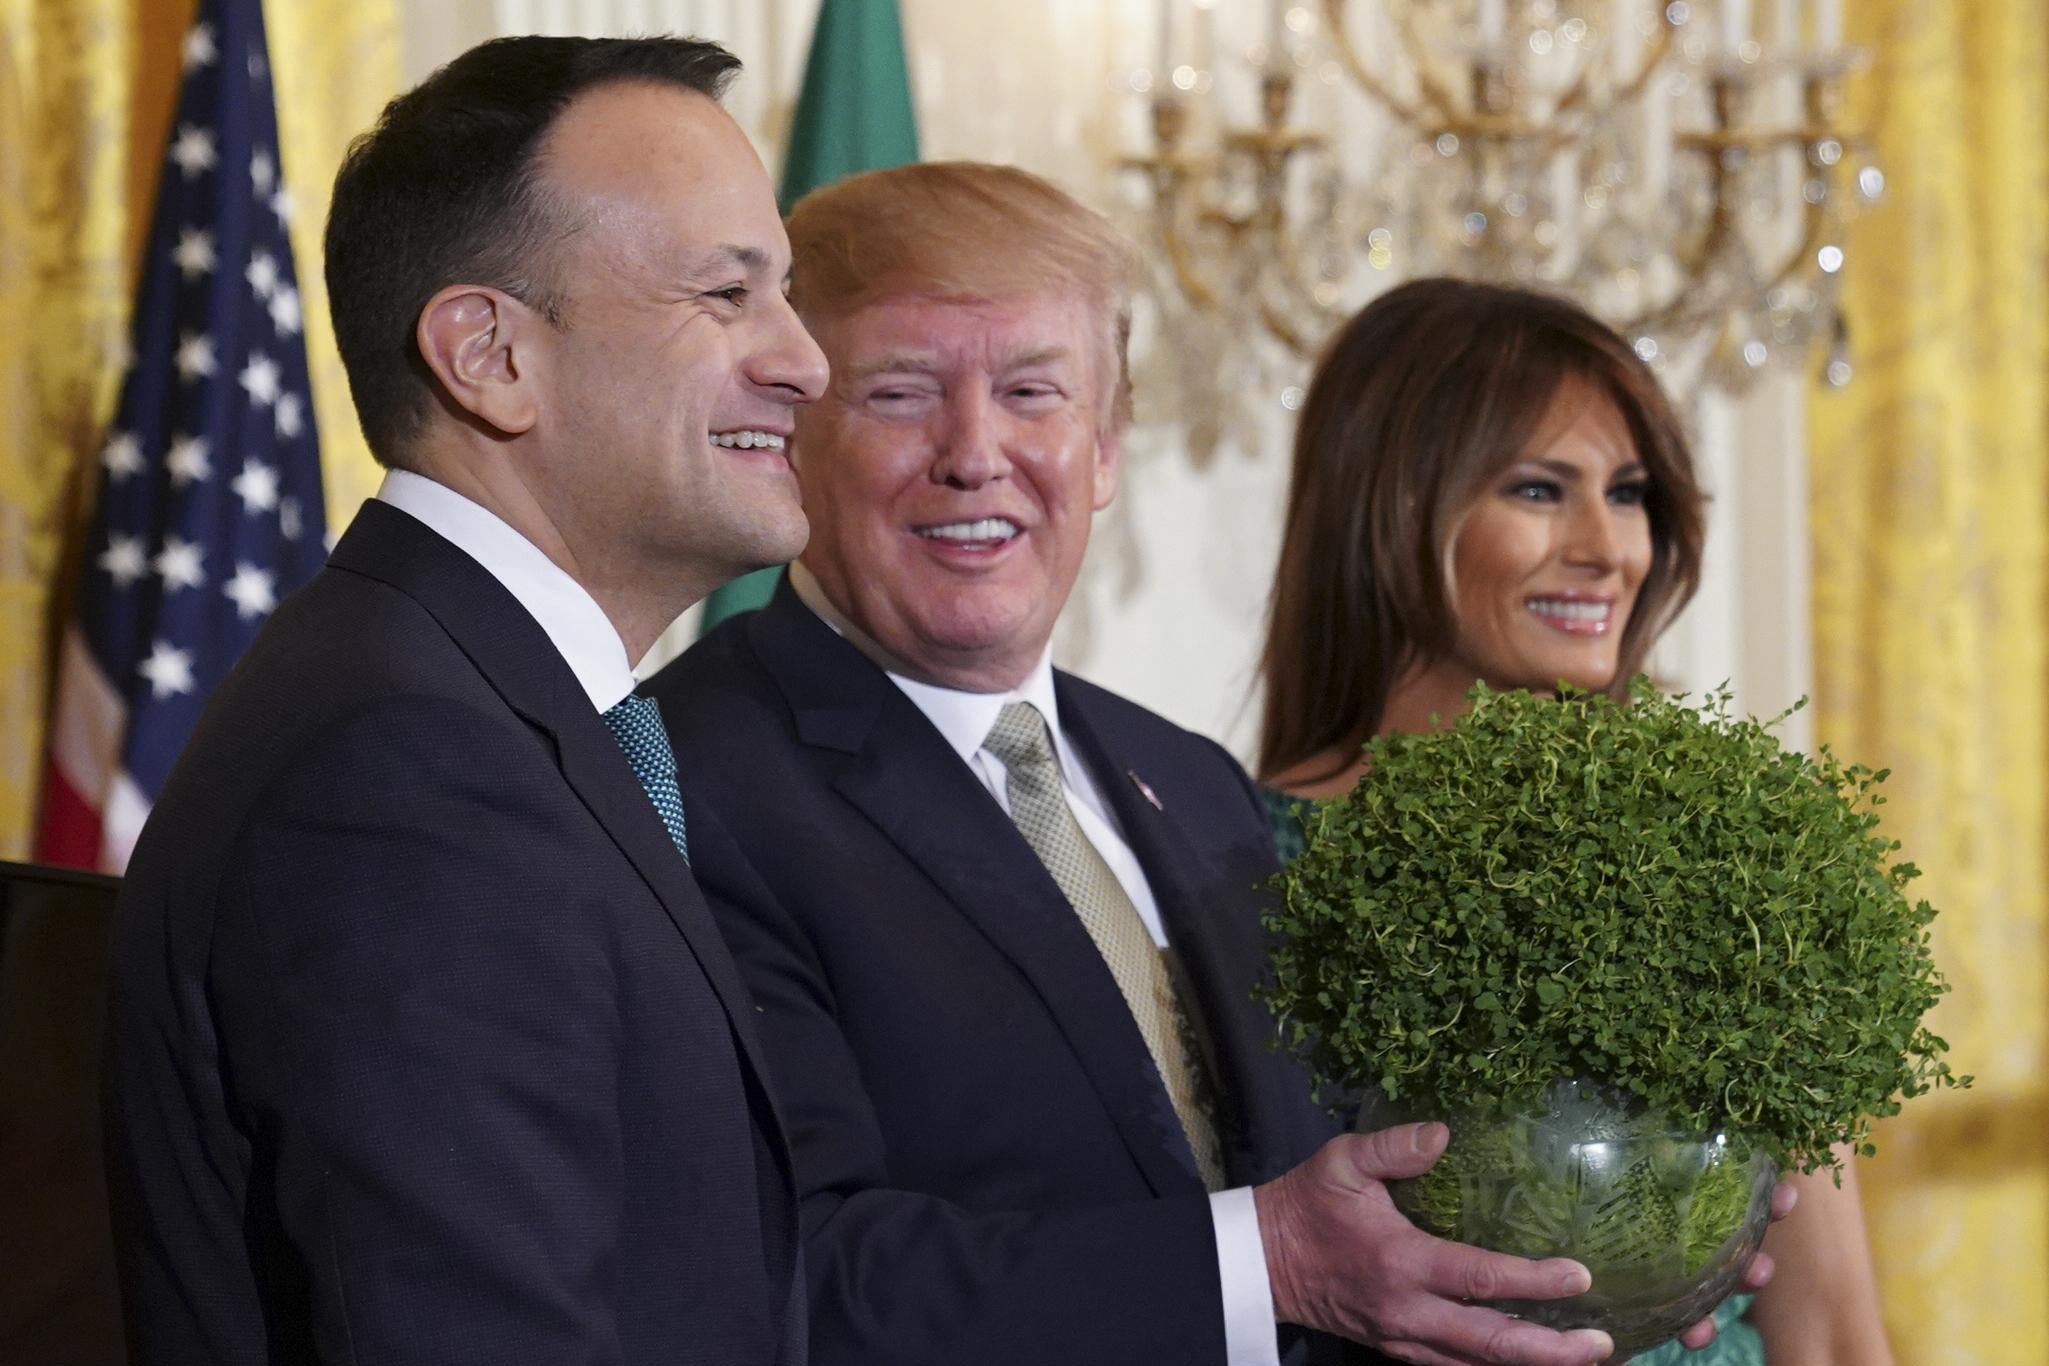 President Donald Trump picks up a bowl of shamrocks as Ireland's Prime Minister Leo Varadkar and First Lady Melania Trump look on in the East Room of the White House March 15, 2018 in Washington, D.C.